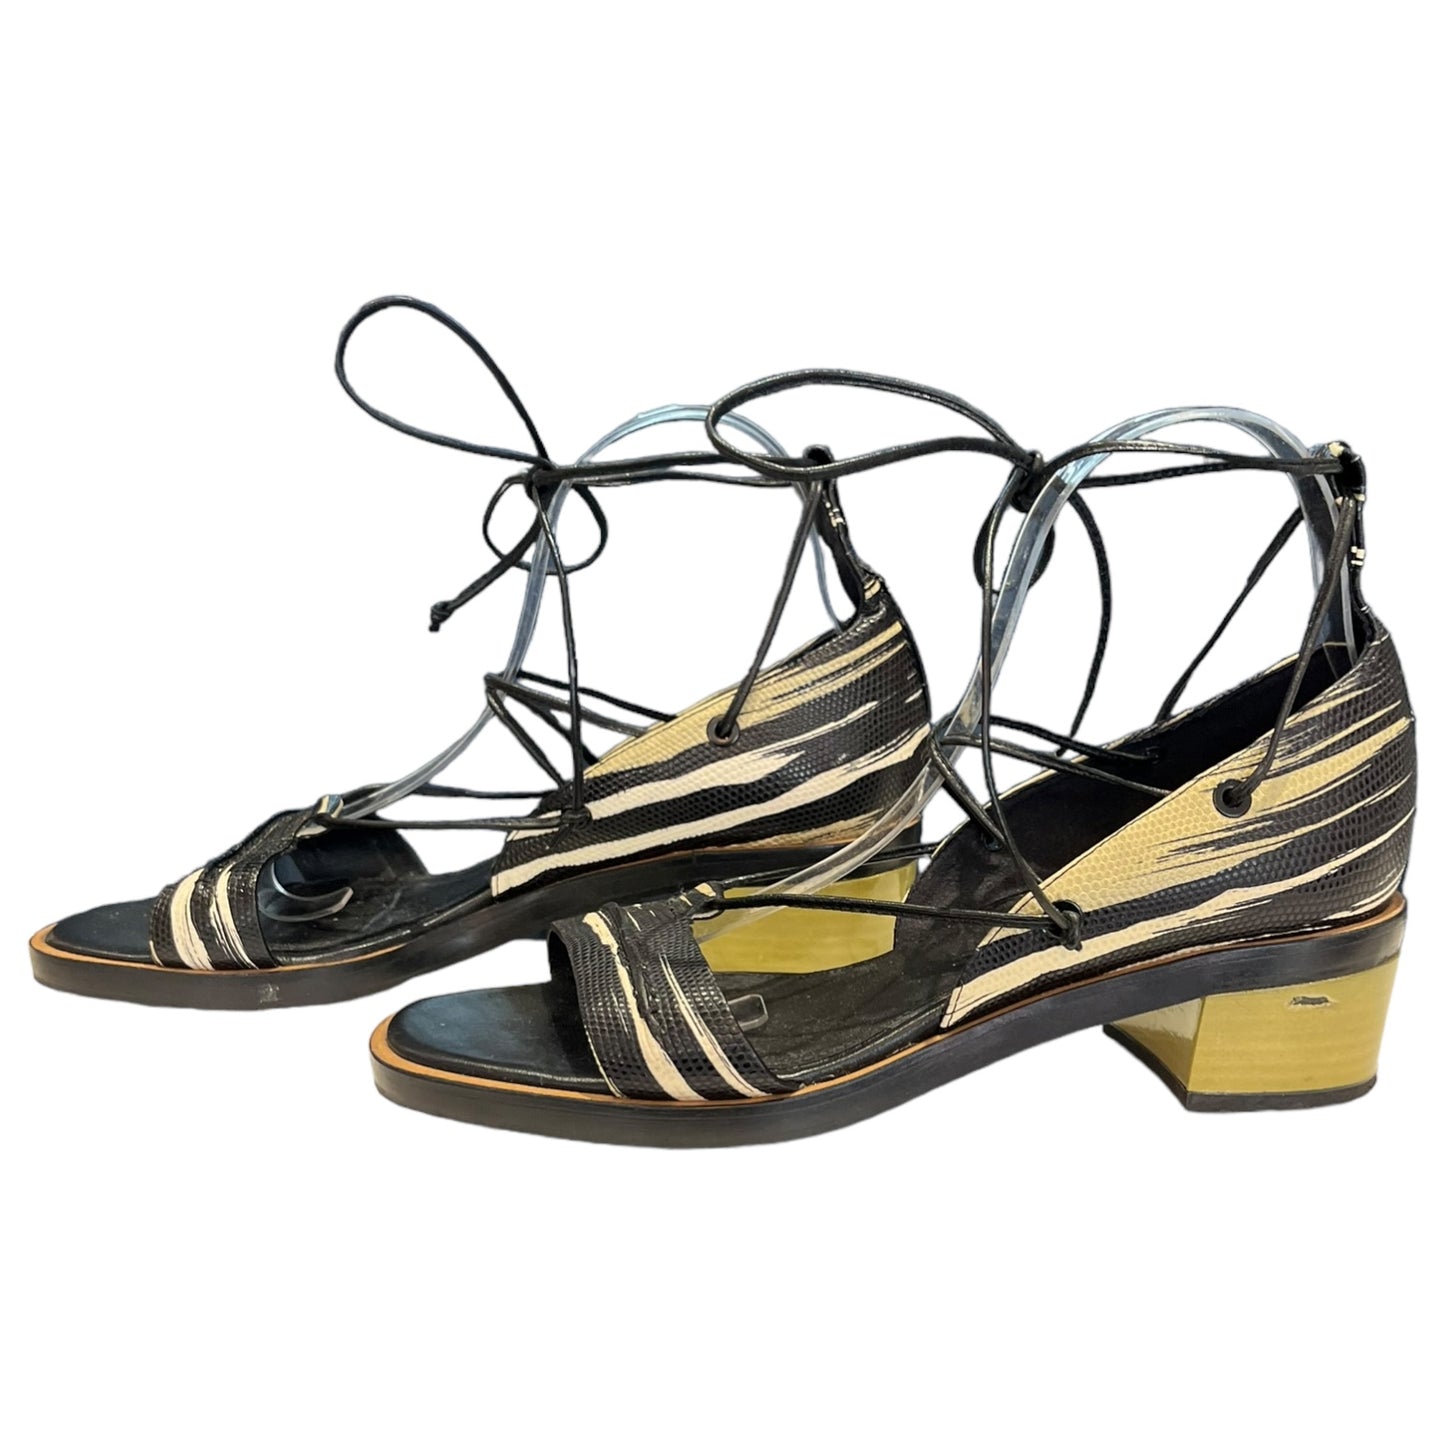 Whistles Black and Green Sandals - 6